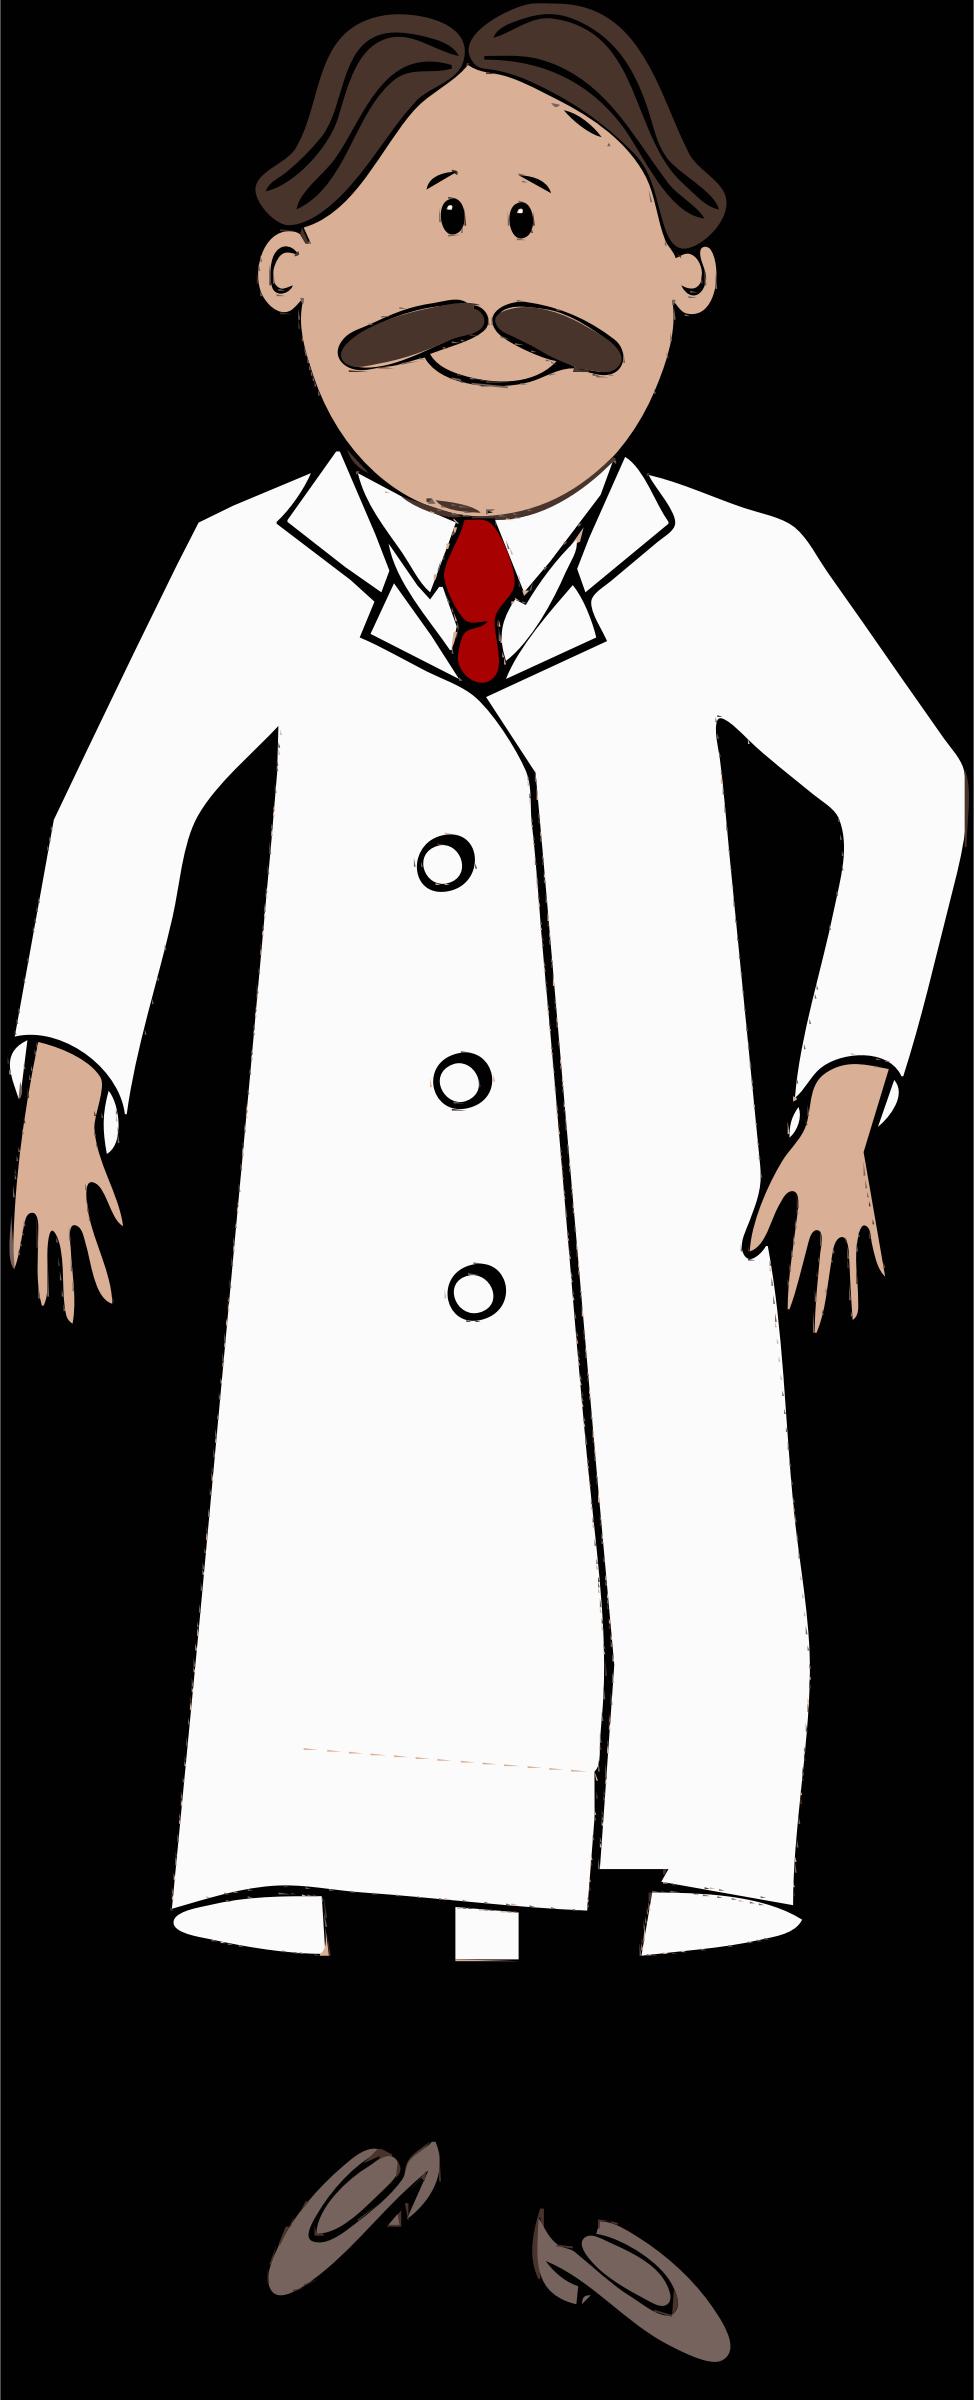 lab coat worn by scientist with mustache png